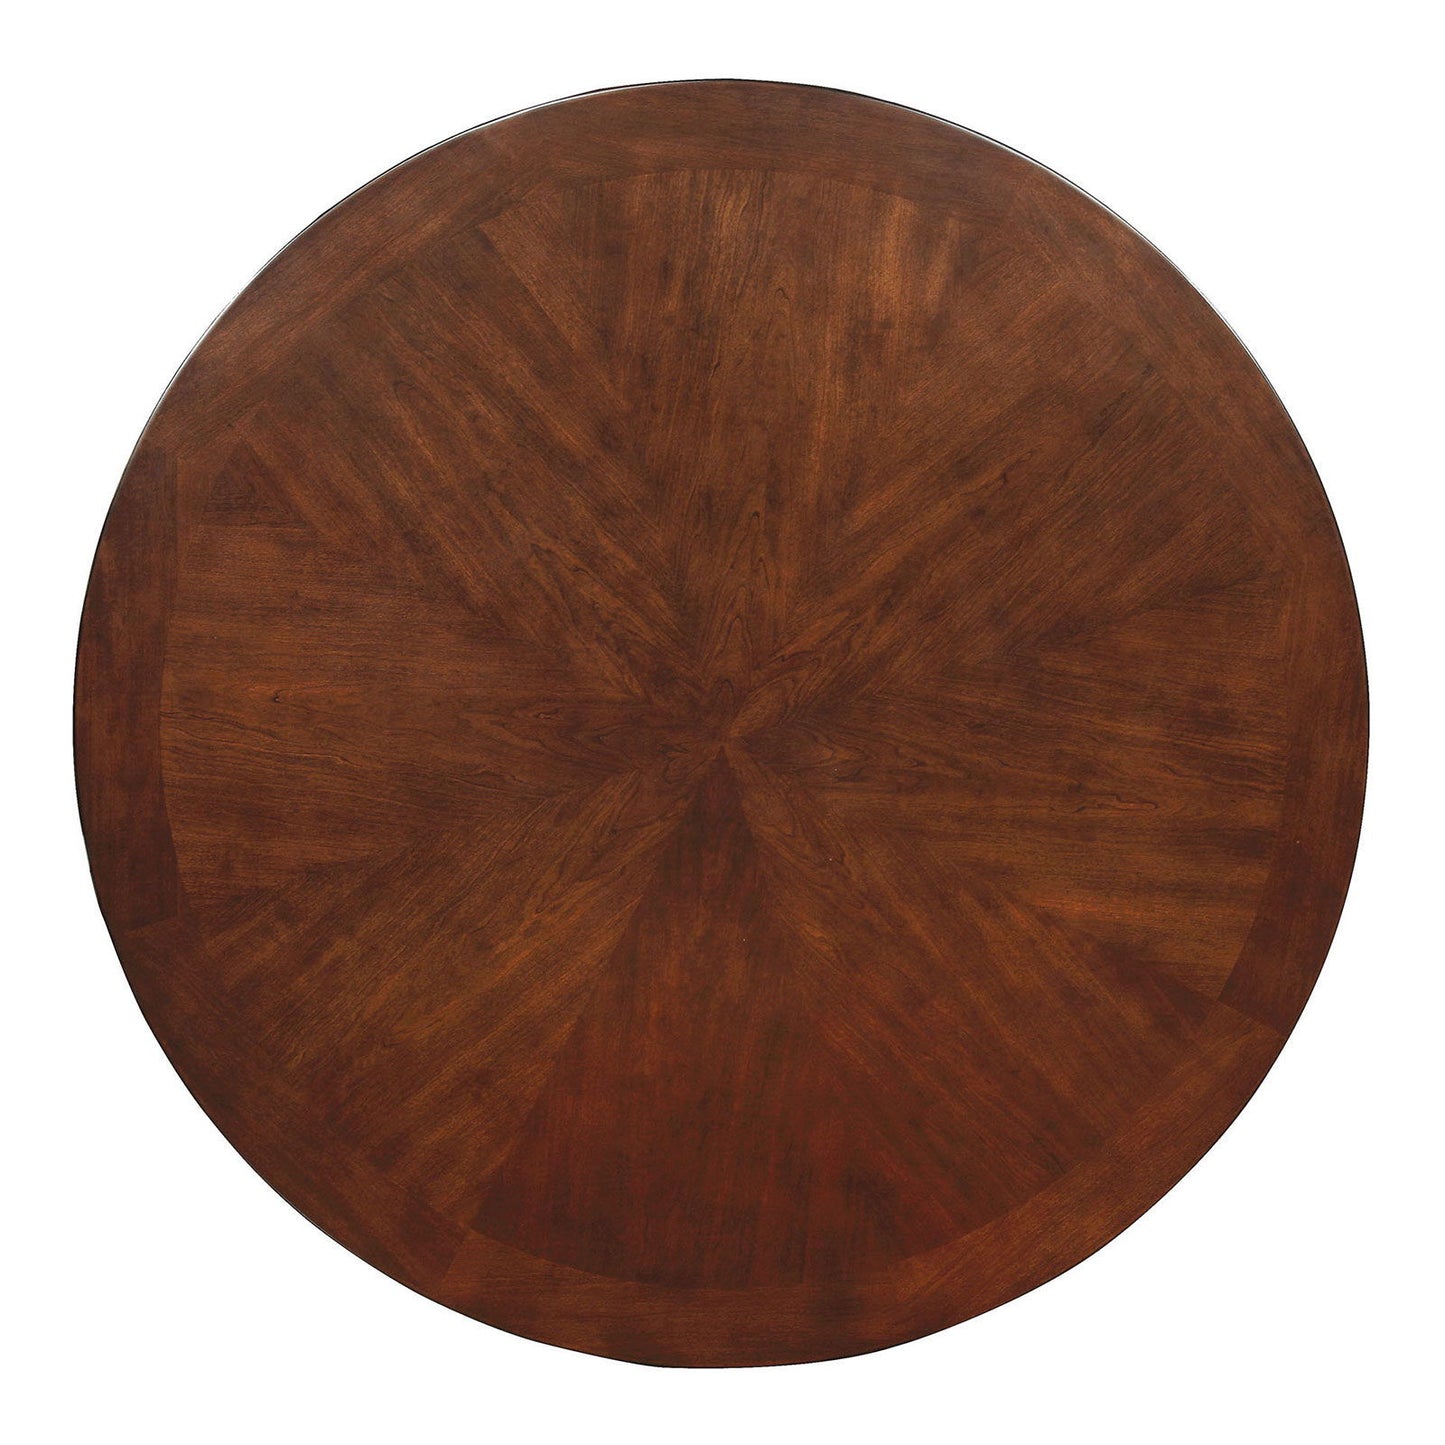 Carlisle - Round Dining Table - Brown Cherry